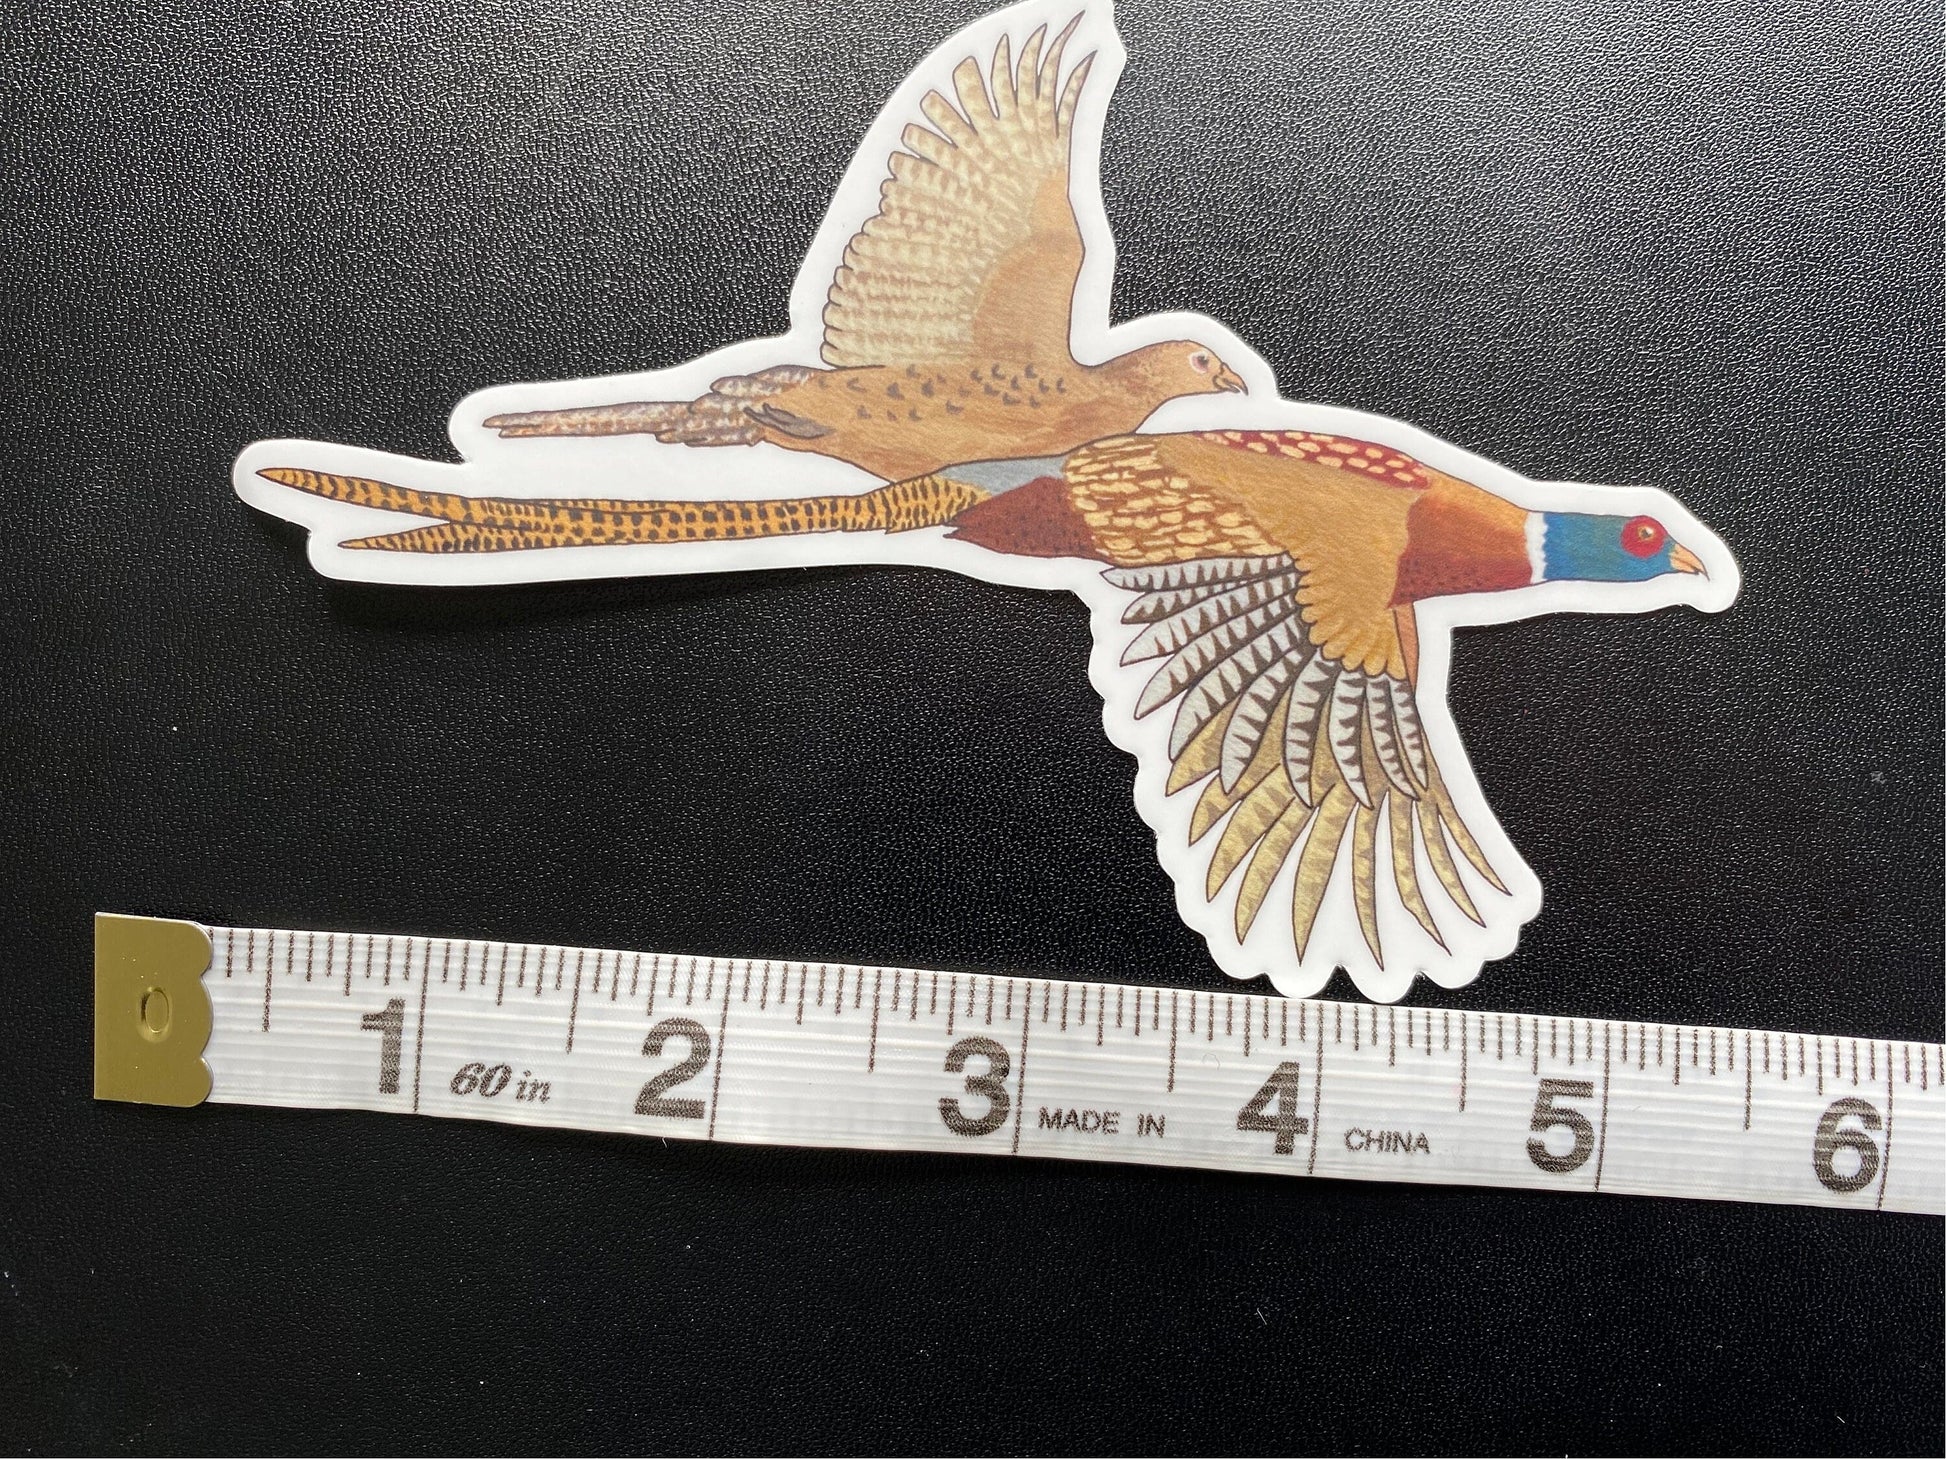 Ring Neck Pheasant Rooster and Hen 5" Die Cut Vinyl Sticker Decal: Durable Matte-Finish